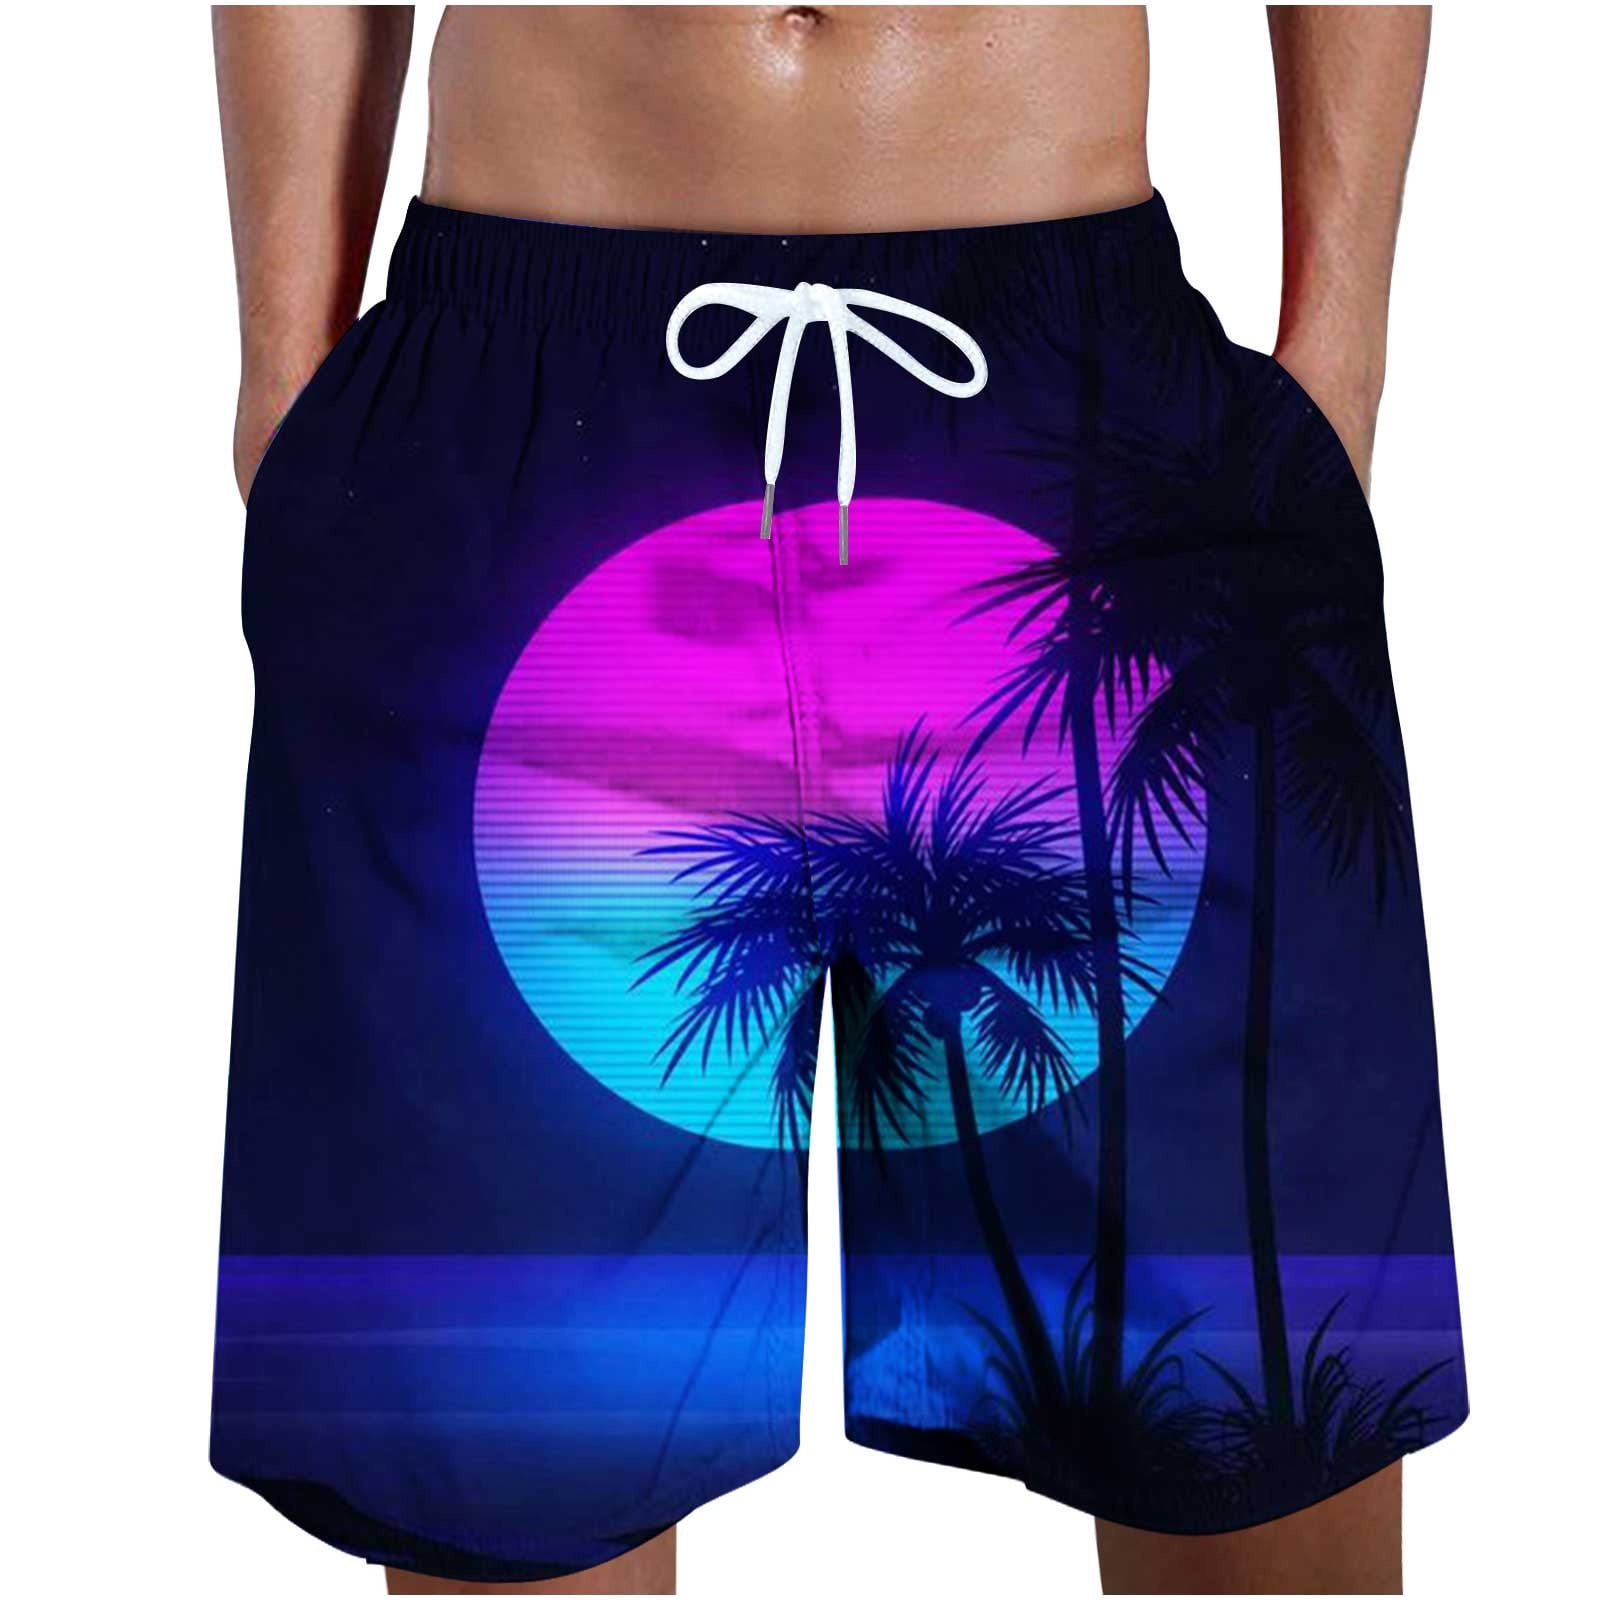 ZCFZJW Big and Tall Regular Fit Swim Trunks for Men Quick Dry Summer ...